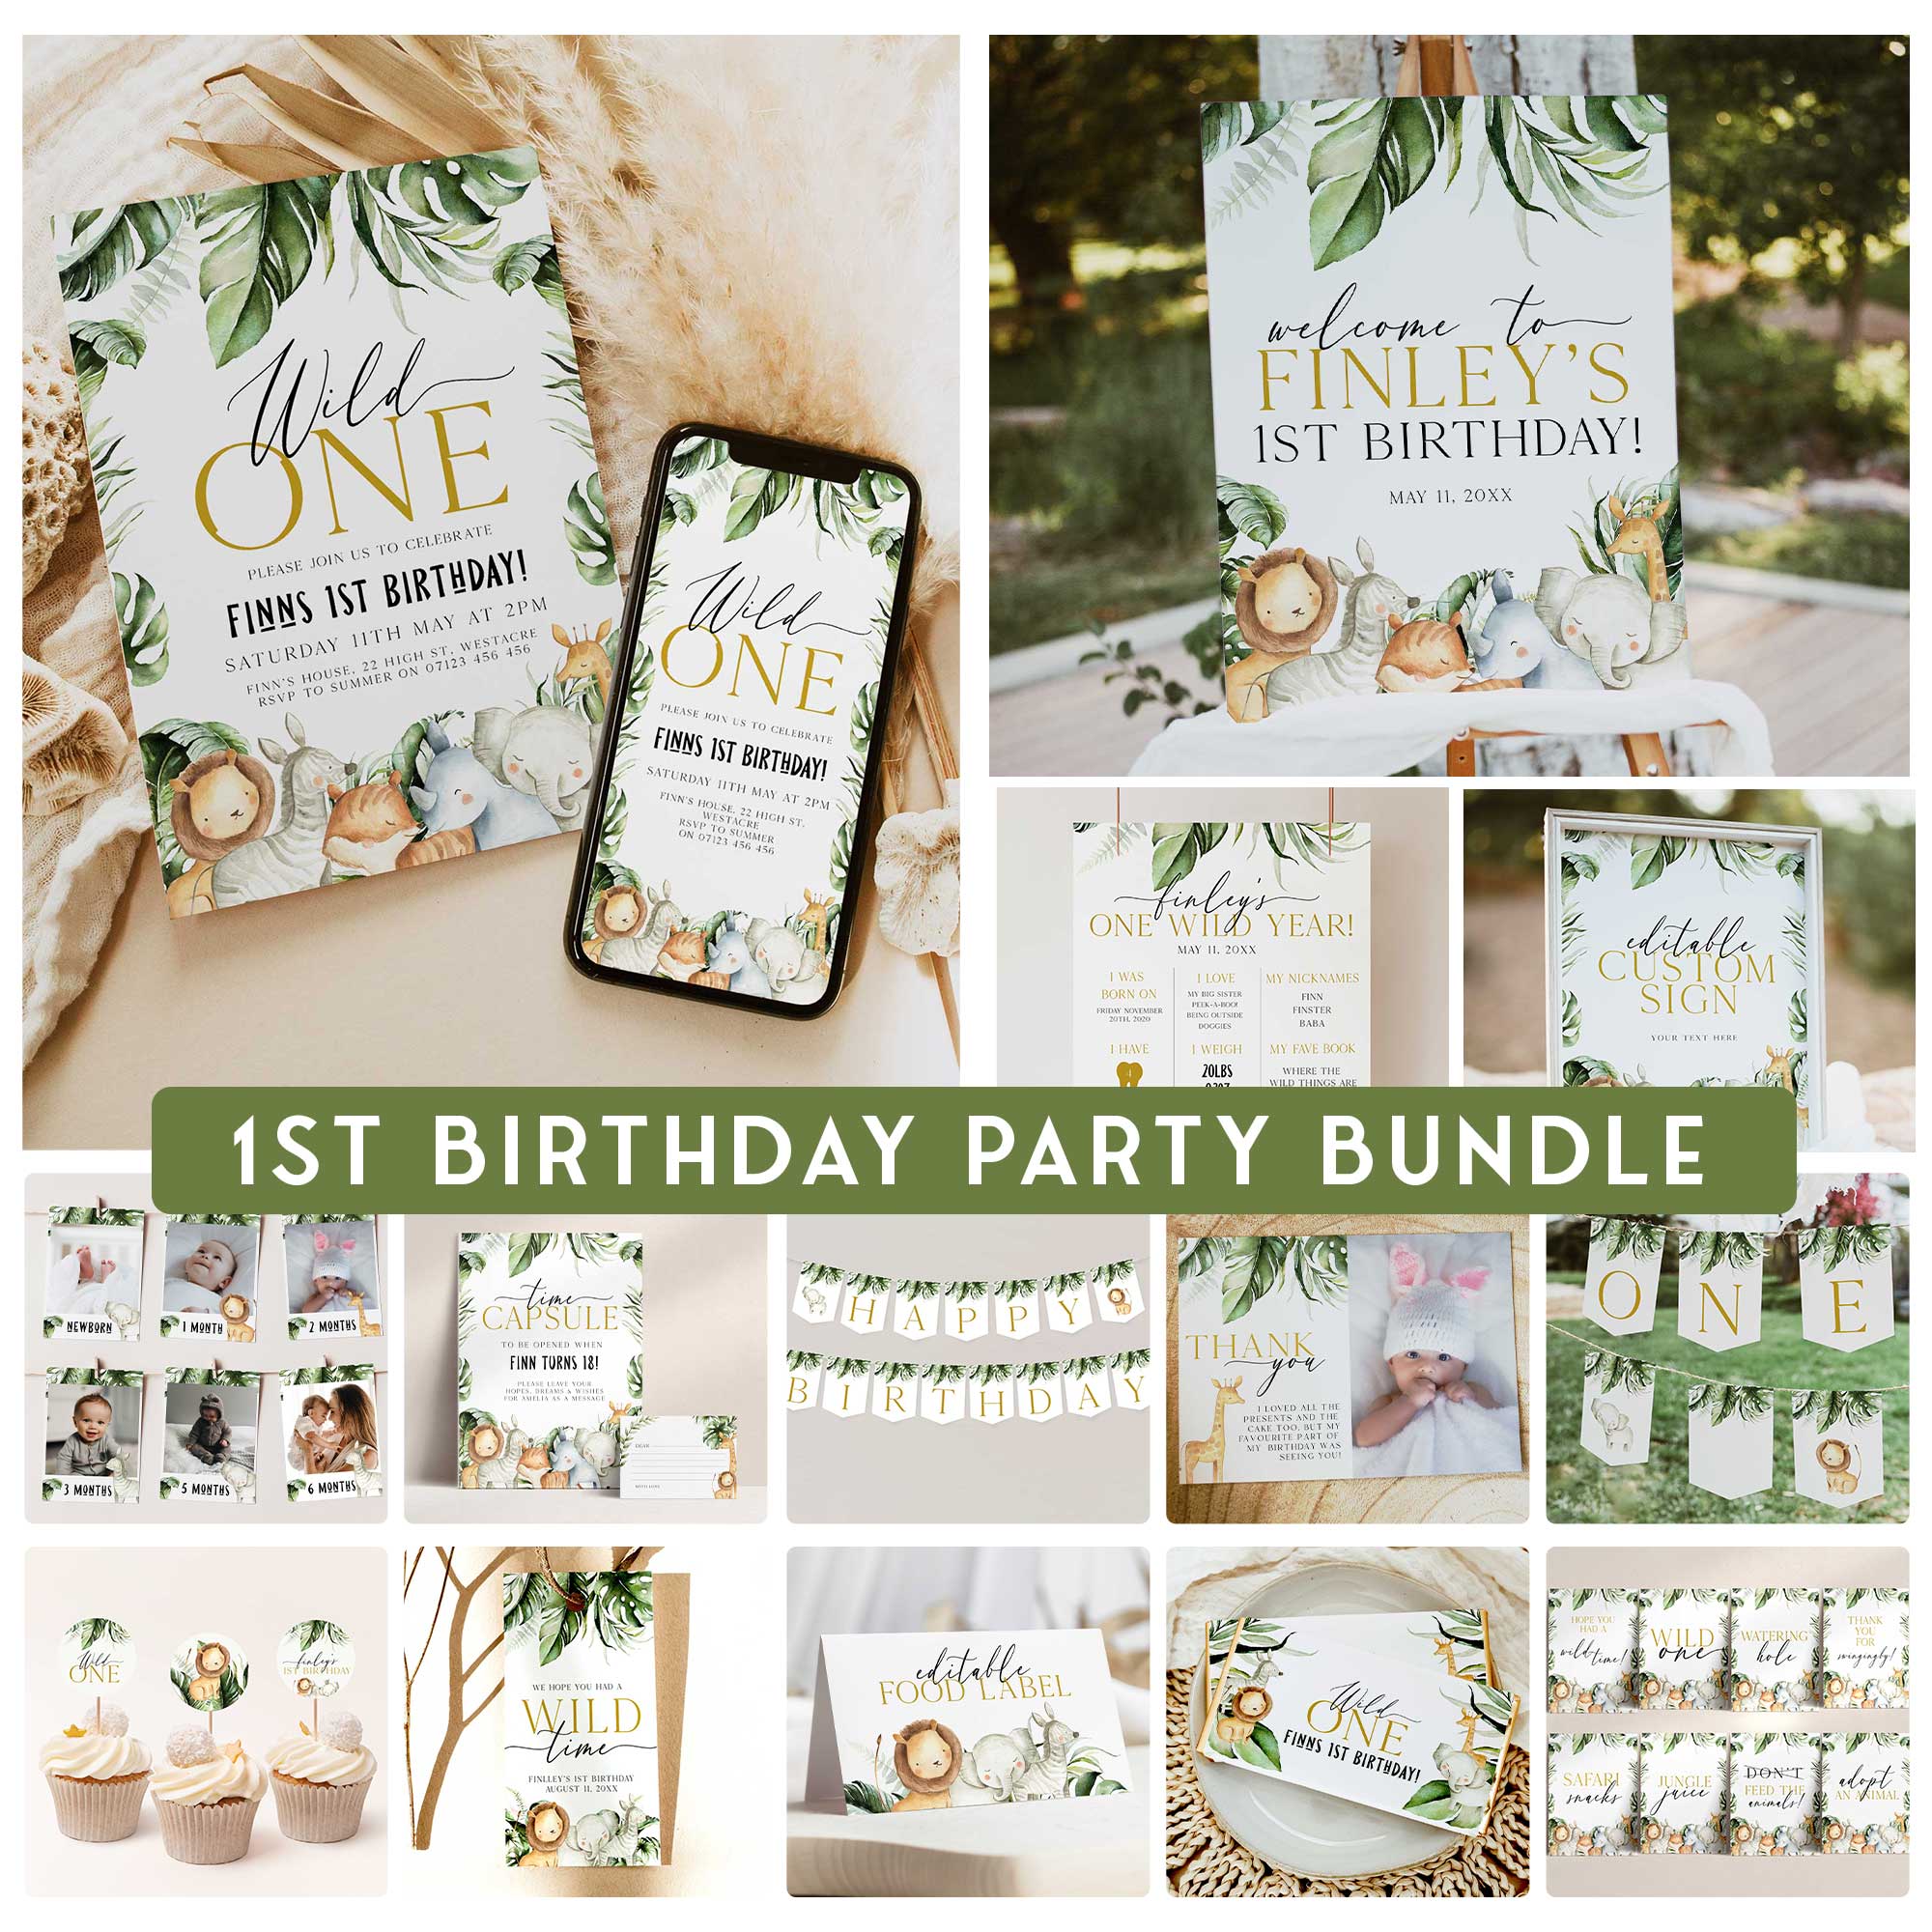 WILD ONE first birthday party bundle including invitations, welcome signs, my first birthday, table signs, tags, bunting and more